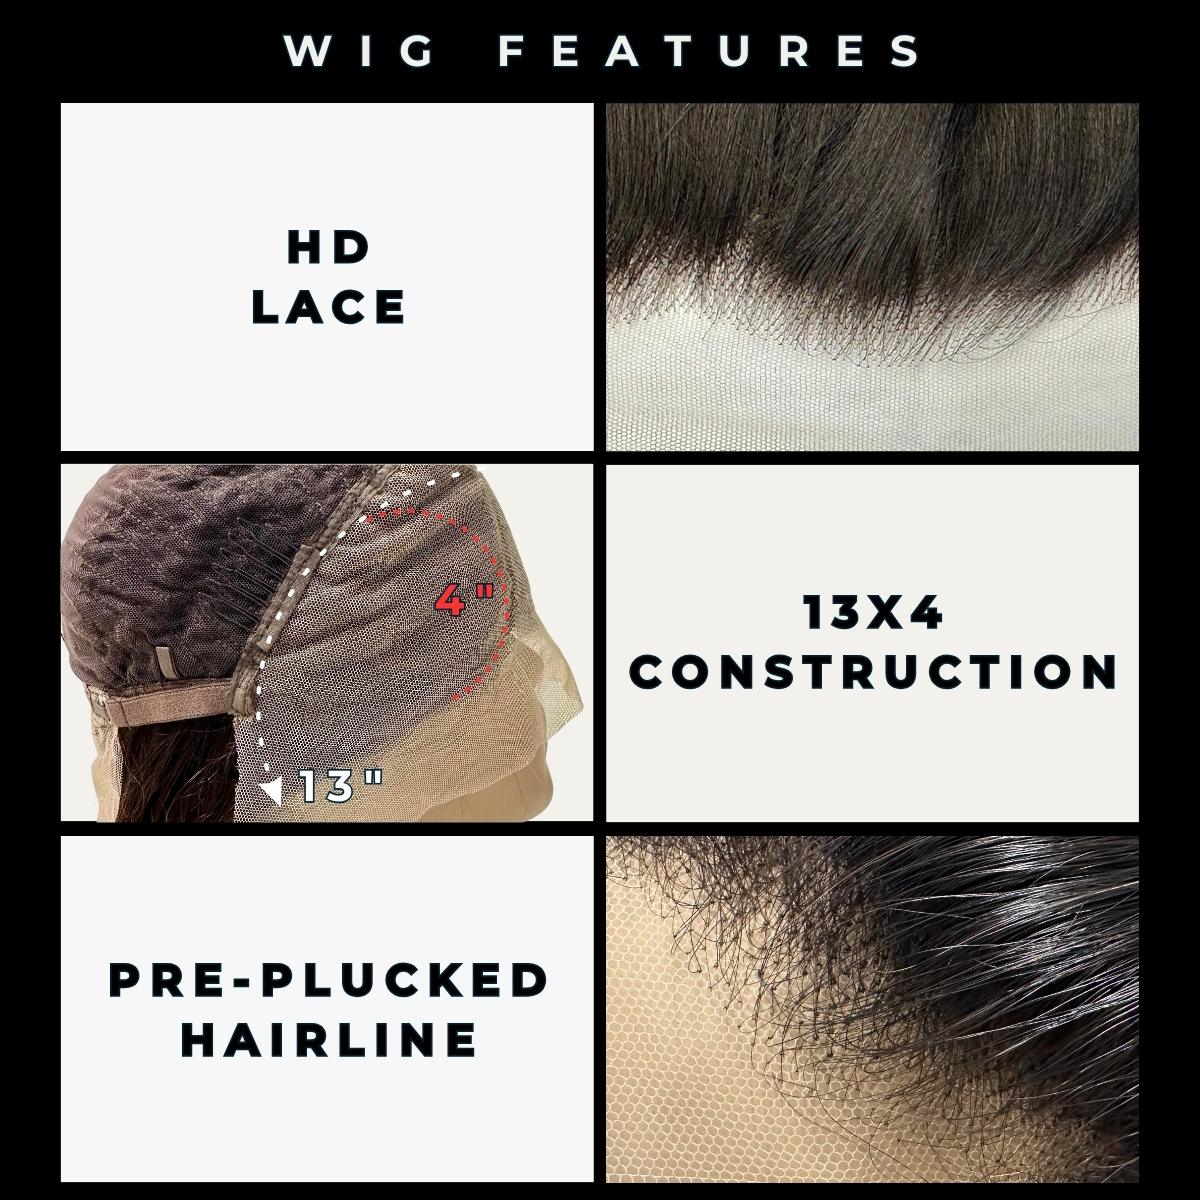 wig features-HD Lace- 13x4 construction- pre-plucked hairline